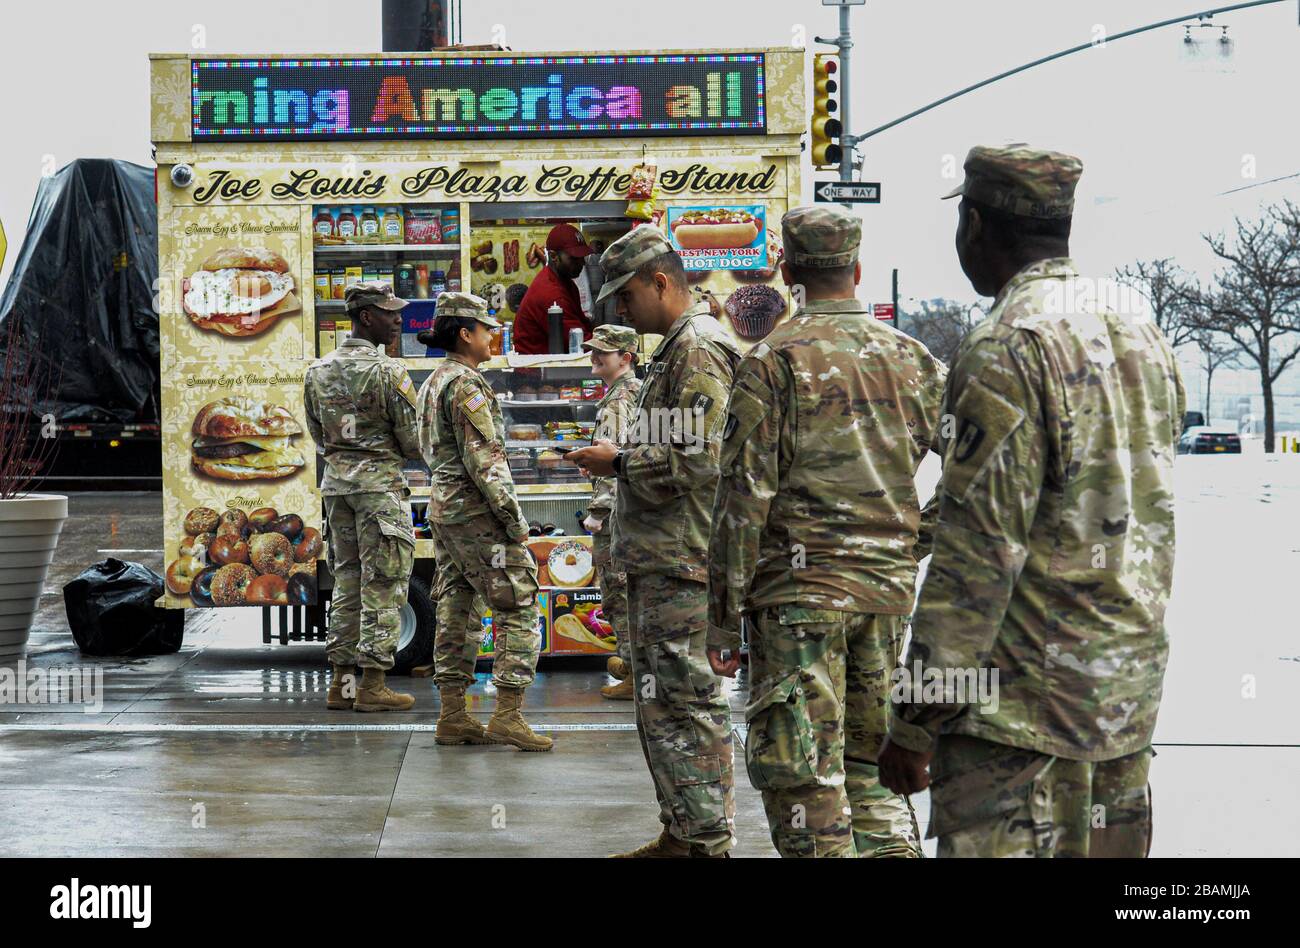 New York Manhattan, USA. 28th Mar, 2020. Army National Guard on the line to buy NYC hot dog out side the The Javits Convention Center. New York Gov. Andrew Cuomo announced the construction of a temporary hospital at the the Jacob K. Javits Center had been completed with the help of FEMA and the National Guard. New York State has over 26,000 cases and 450 people died from the pandemic in NYS in the past 24 hours. 03/28/20. New York Manhattan. Marcus Santos. Credit: Marcus Santos/ZUMA Wire/Alamy Live News Stock Photo